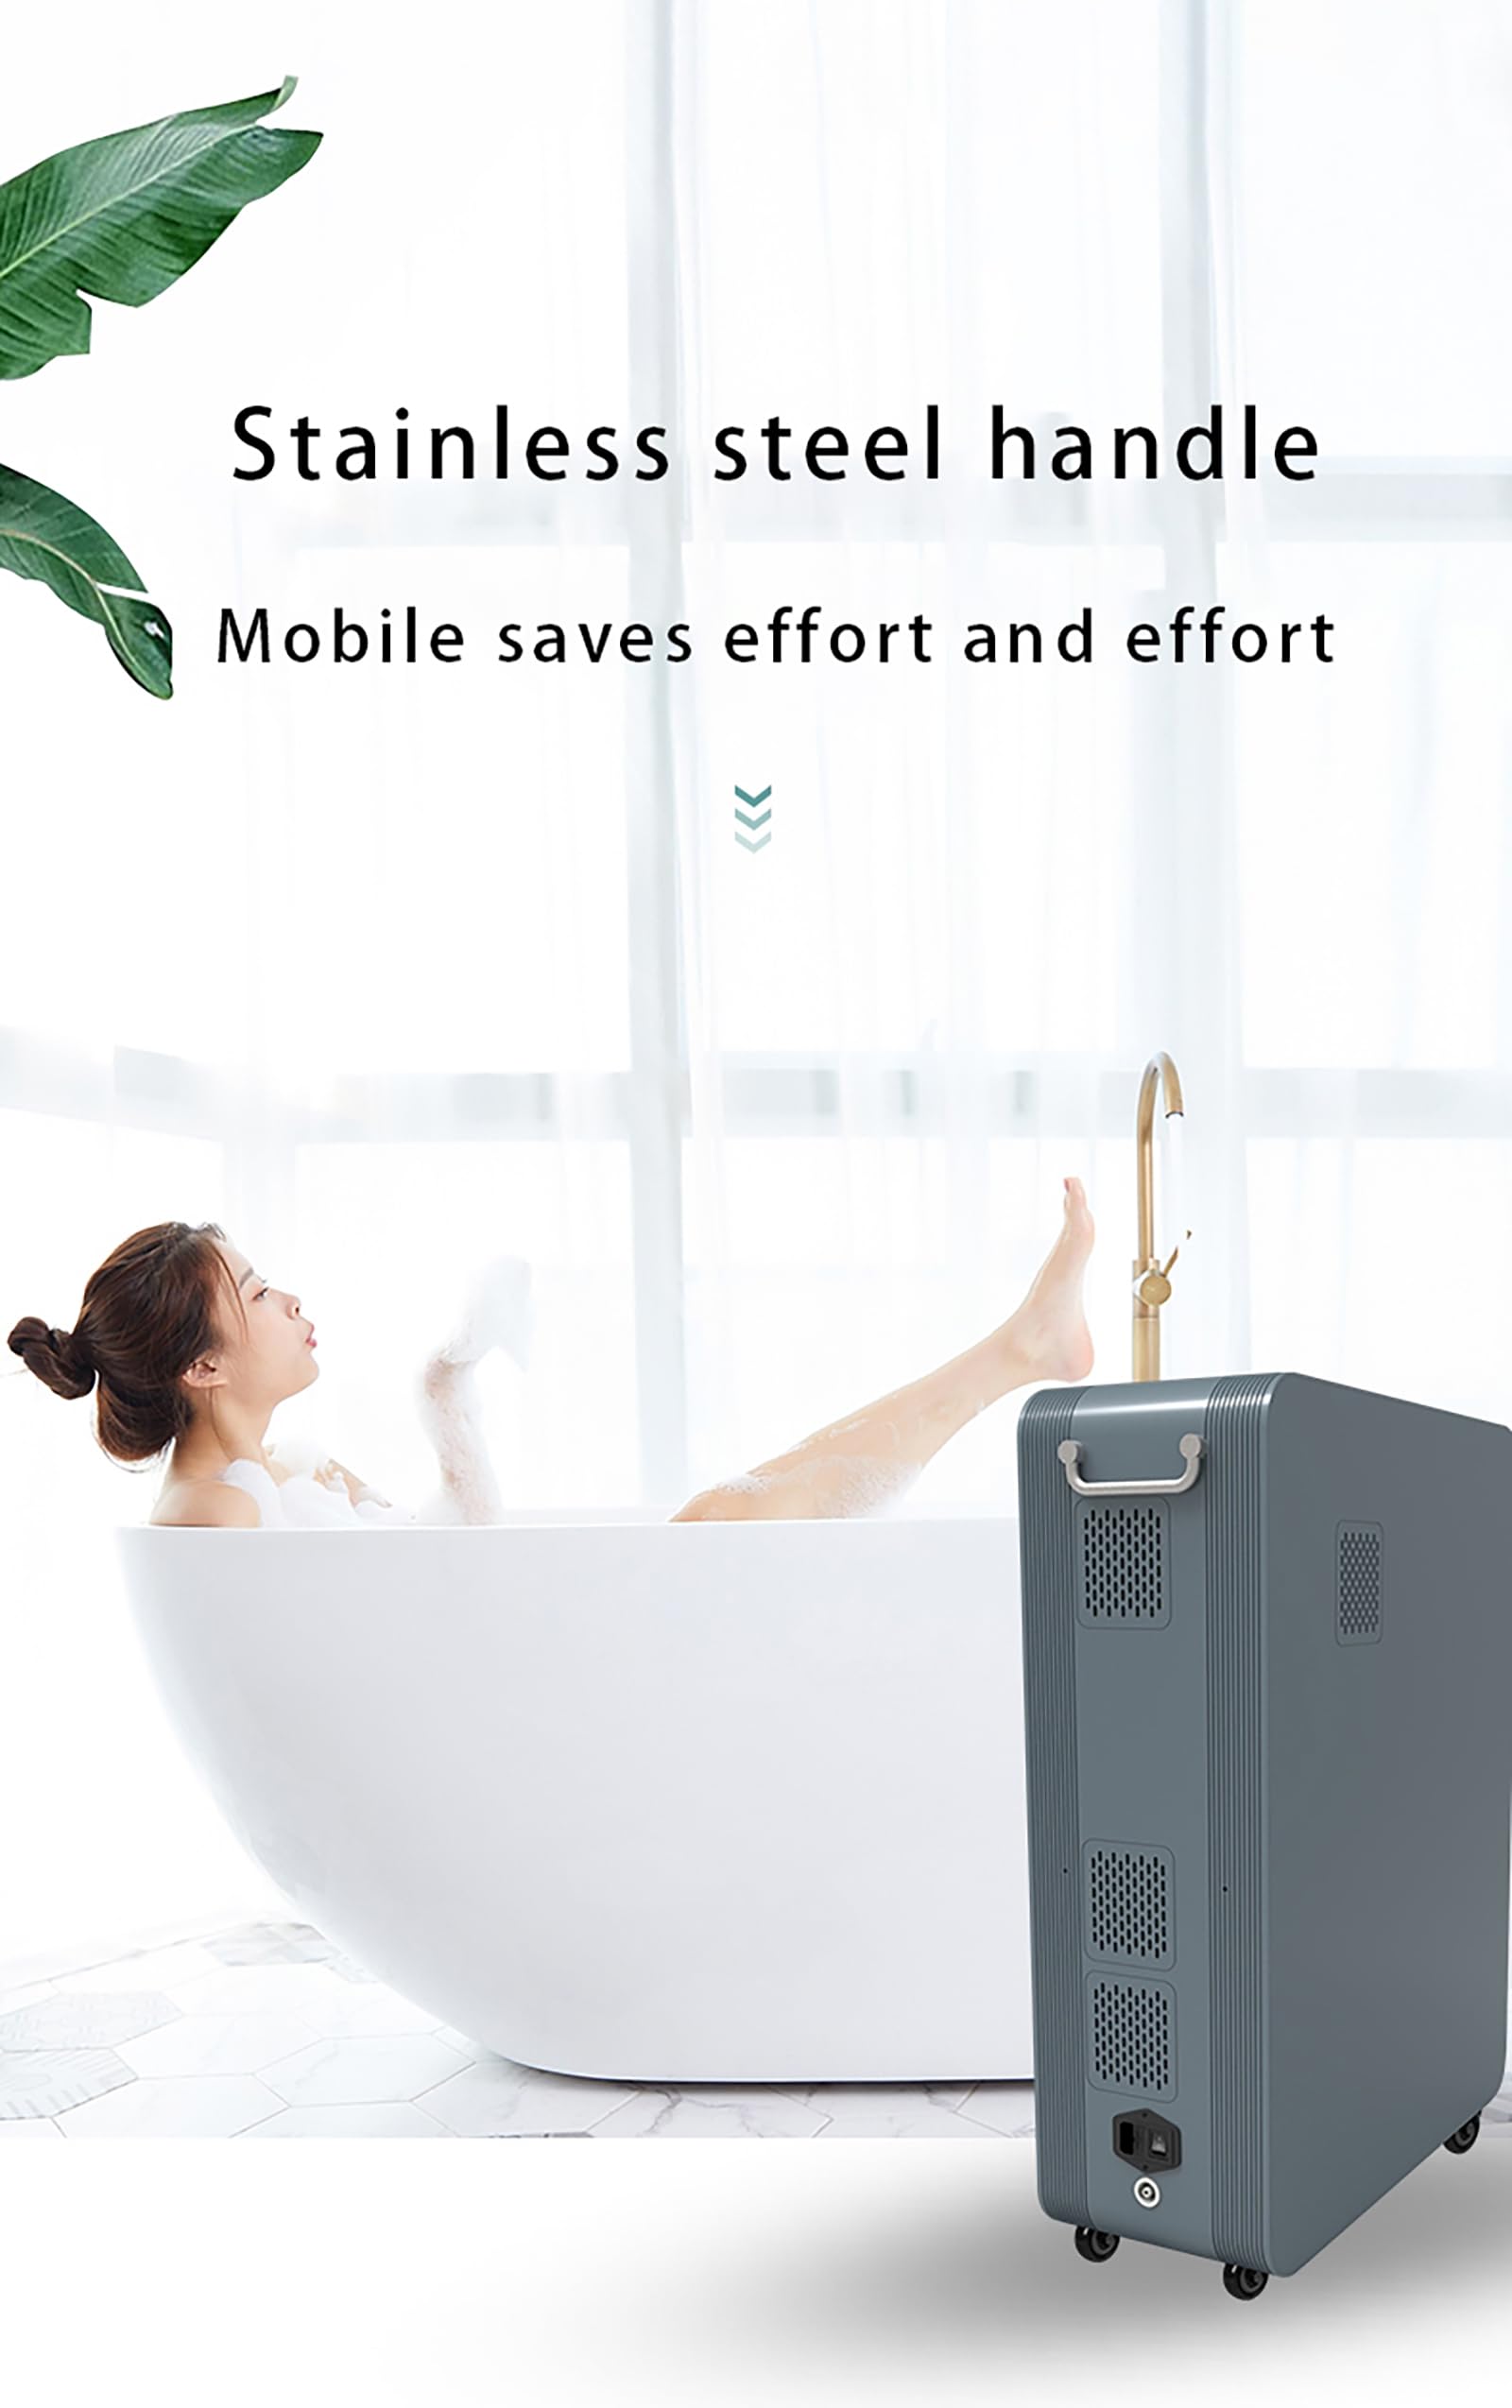 Aniwini Hydrogen Bath Machine, 3500ml/min, H2 Bubble Bath for Immune Support & Relaxation, 99.99% High Purity, Hydrotherapy Generator for Baths, Up to 2500PPB